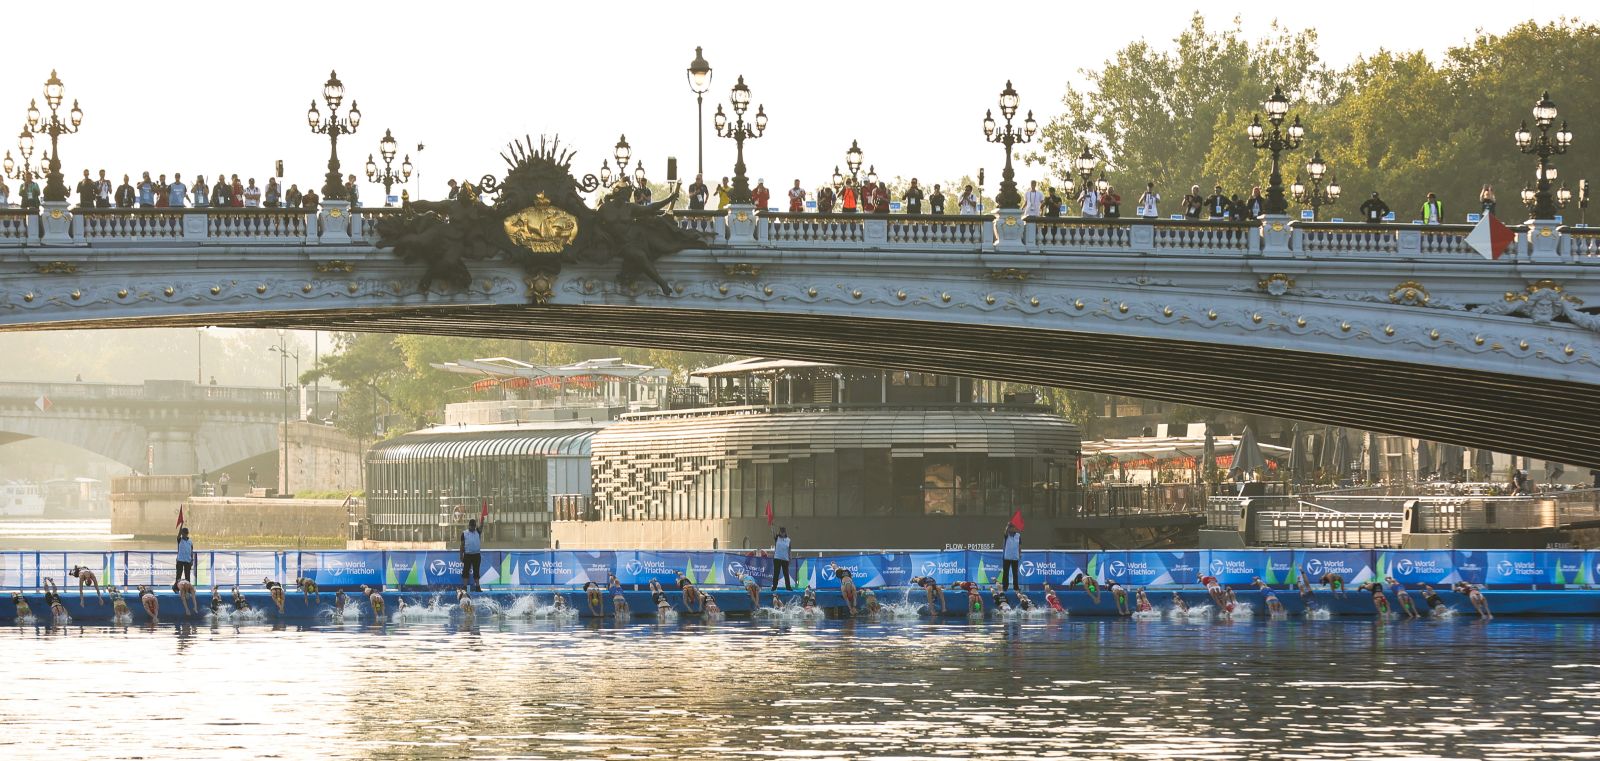 epa10803841 Athletes compete in the Seine river in the swimming during a triathlon competition in the surroundings of the Pont Alexandre III bridge in Paris, France, 17 August 2023. From 17 to 20 August, Paris will be hosting the triathlon and para-triathlon test event for the Paris 2024 Olympic Games. 240 athletes are taking part in this test event where the results will be taken into account in the World Triathlon rankings for Olympic qualification.  EPA/TERESA SUAREZ